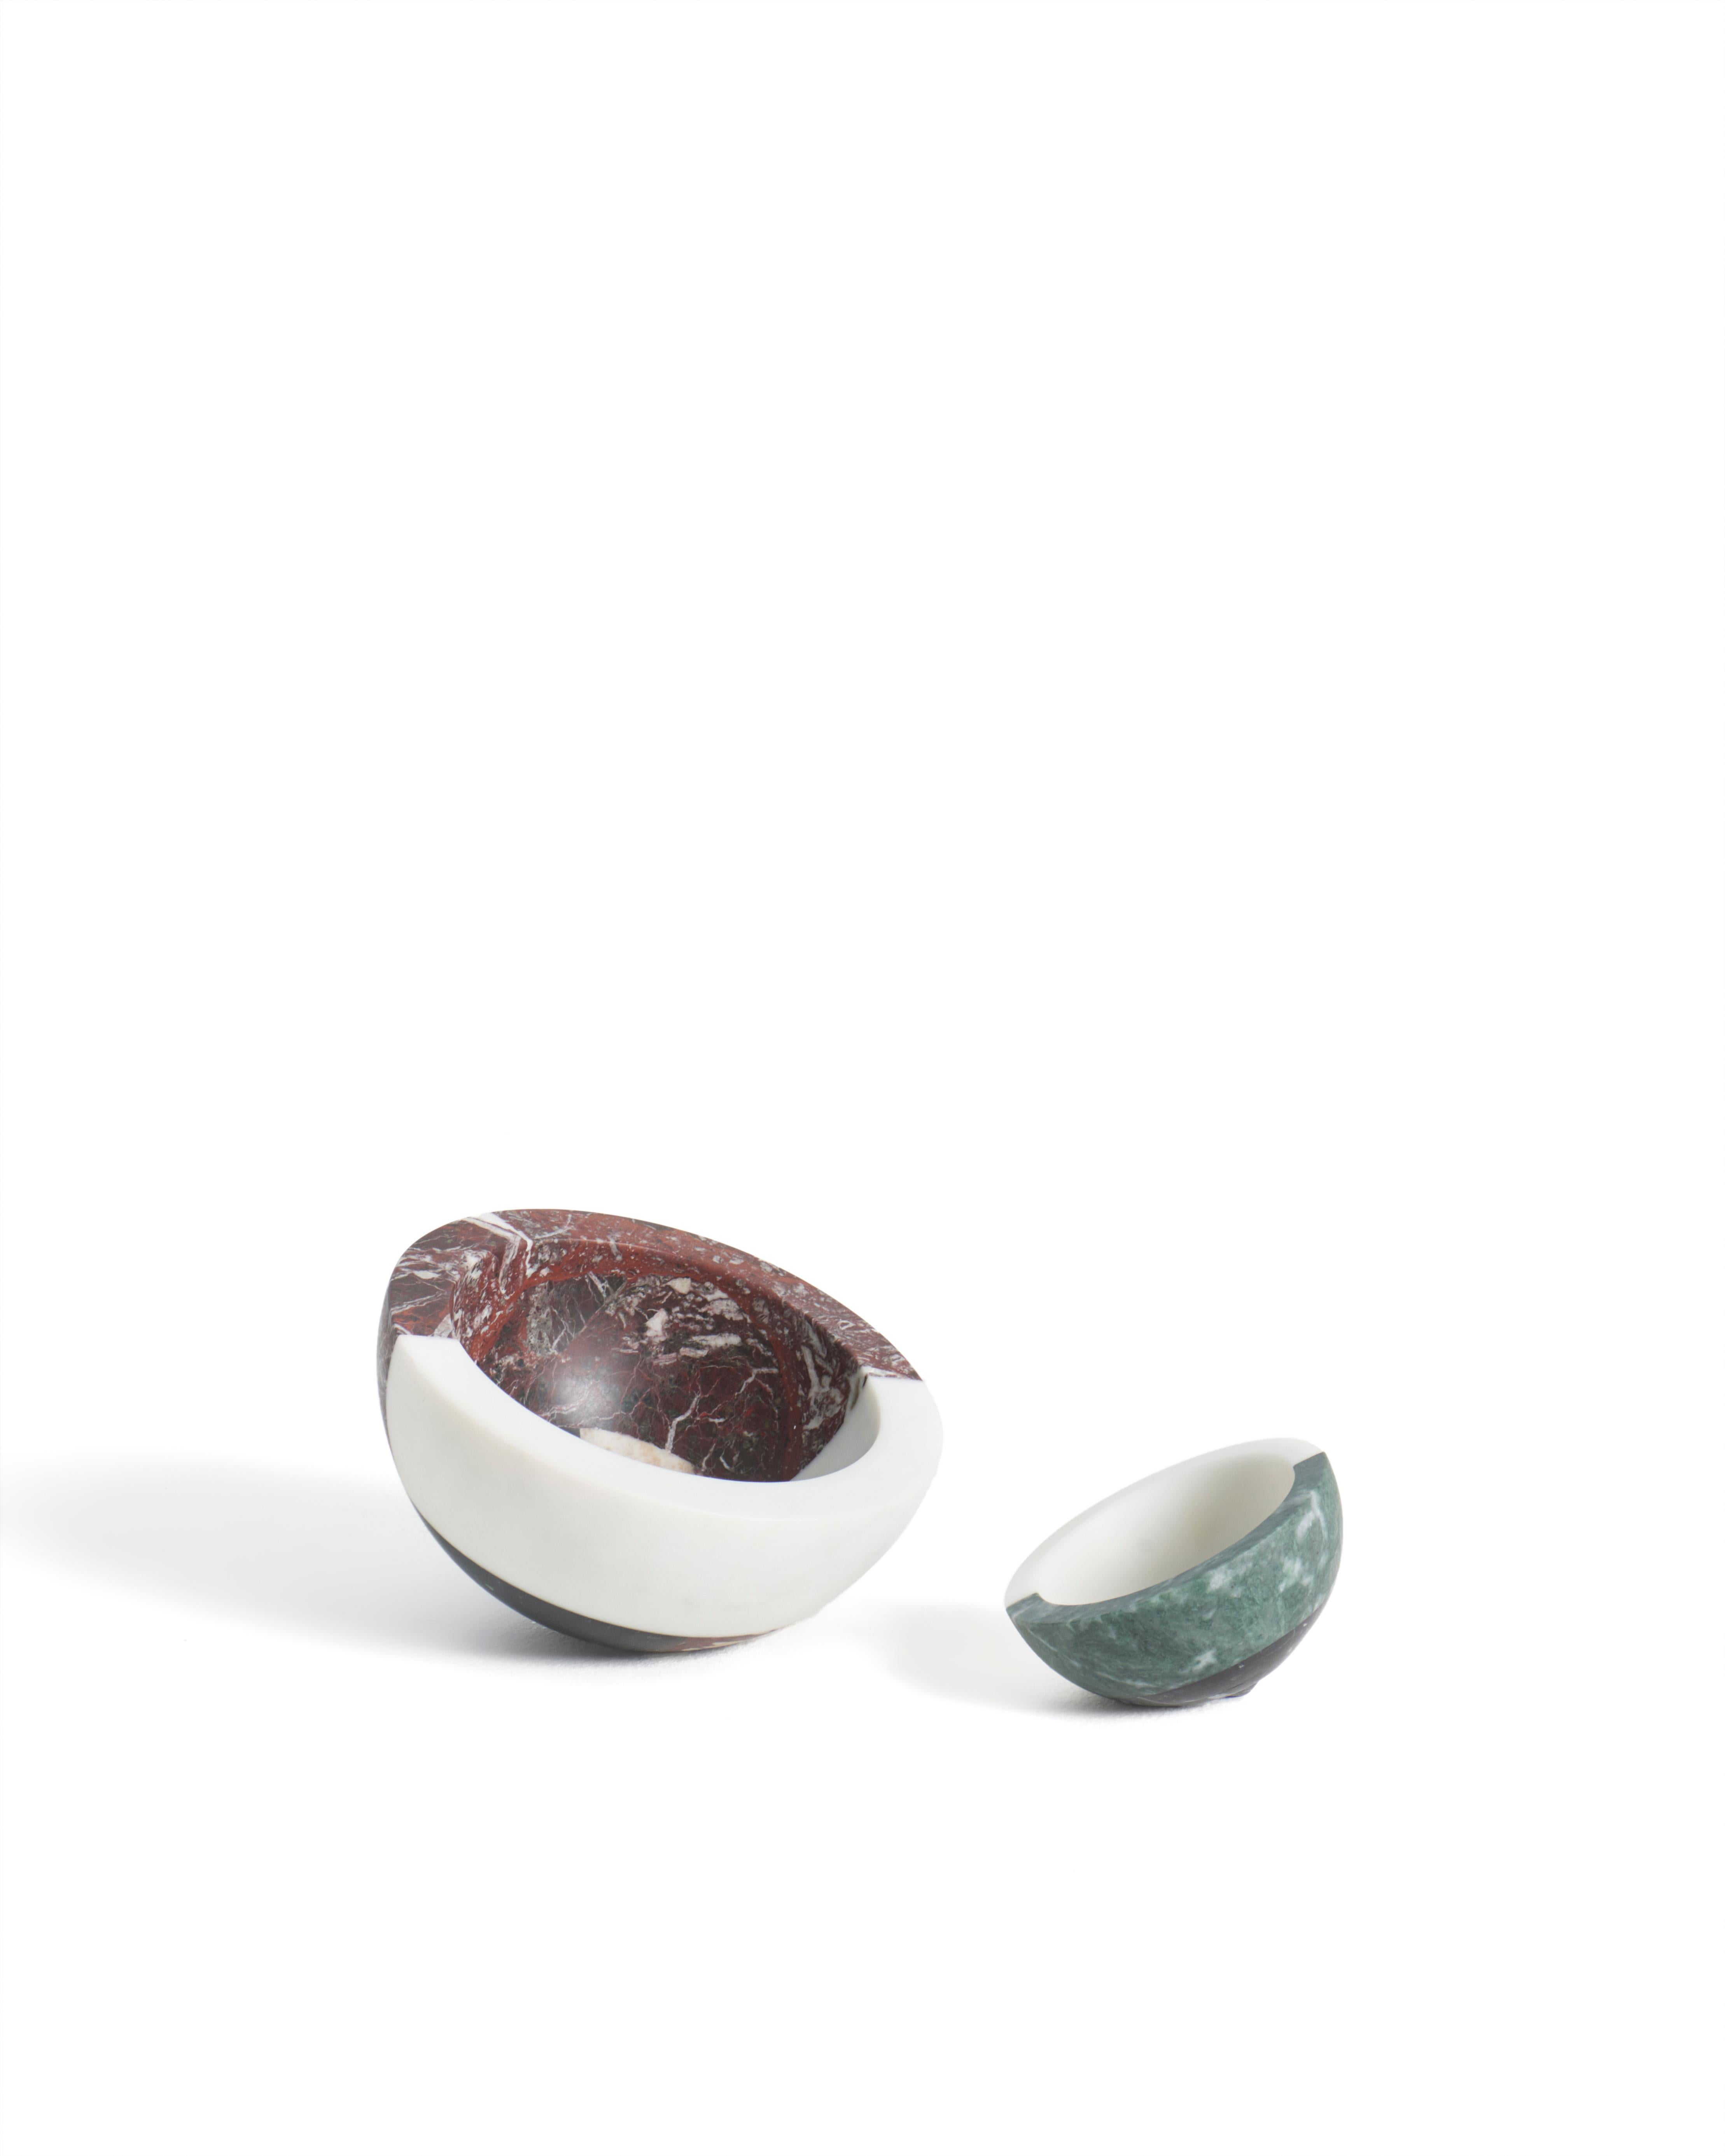 Small bowl in Nero Marquinia, Bianco Michelangelo, Verde Guatemala marbles.
Size: 13.5 x 7 cm, 5.3 x 2.8 in, smooth finishing. Commercial name: Gae S, Masters Collection by the Austrian designer Arthur Arbesser. Made in Italy, hand